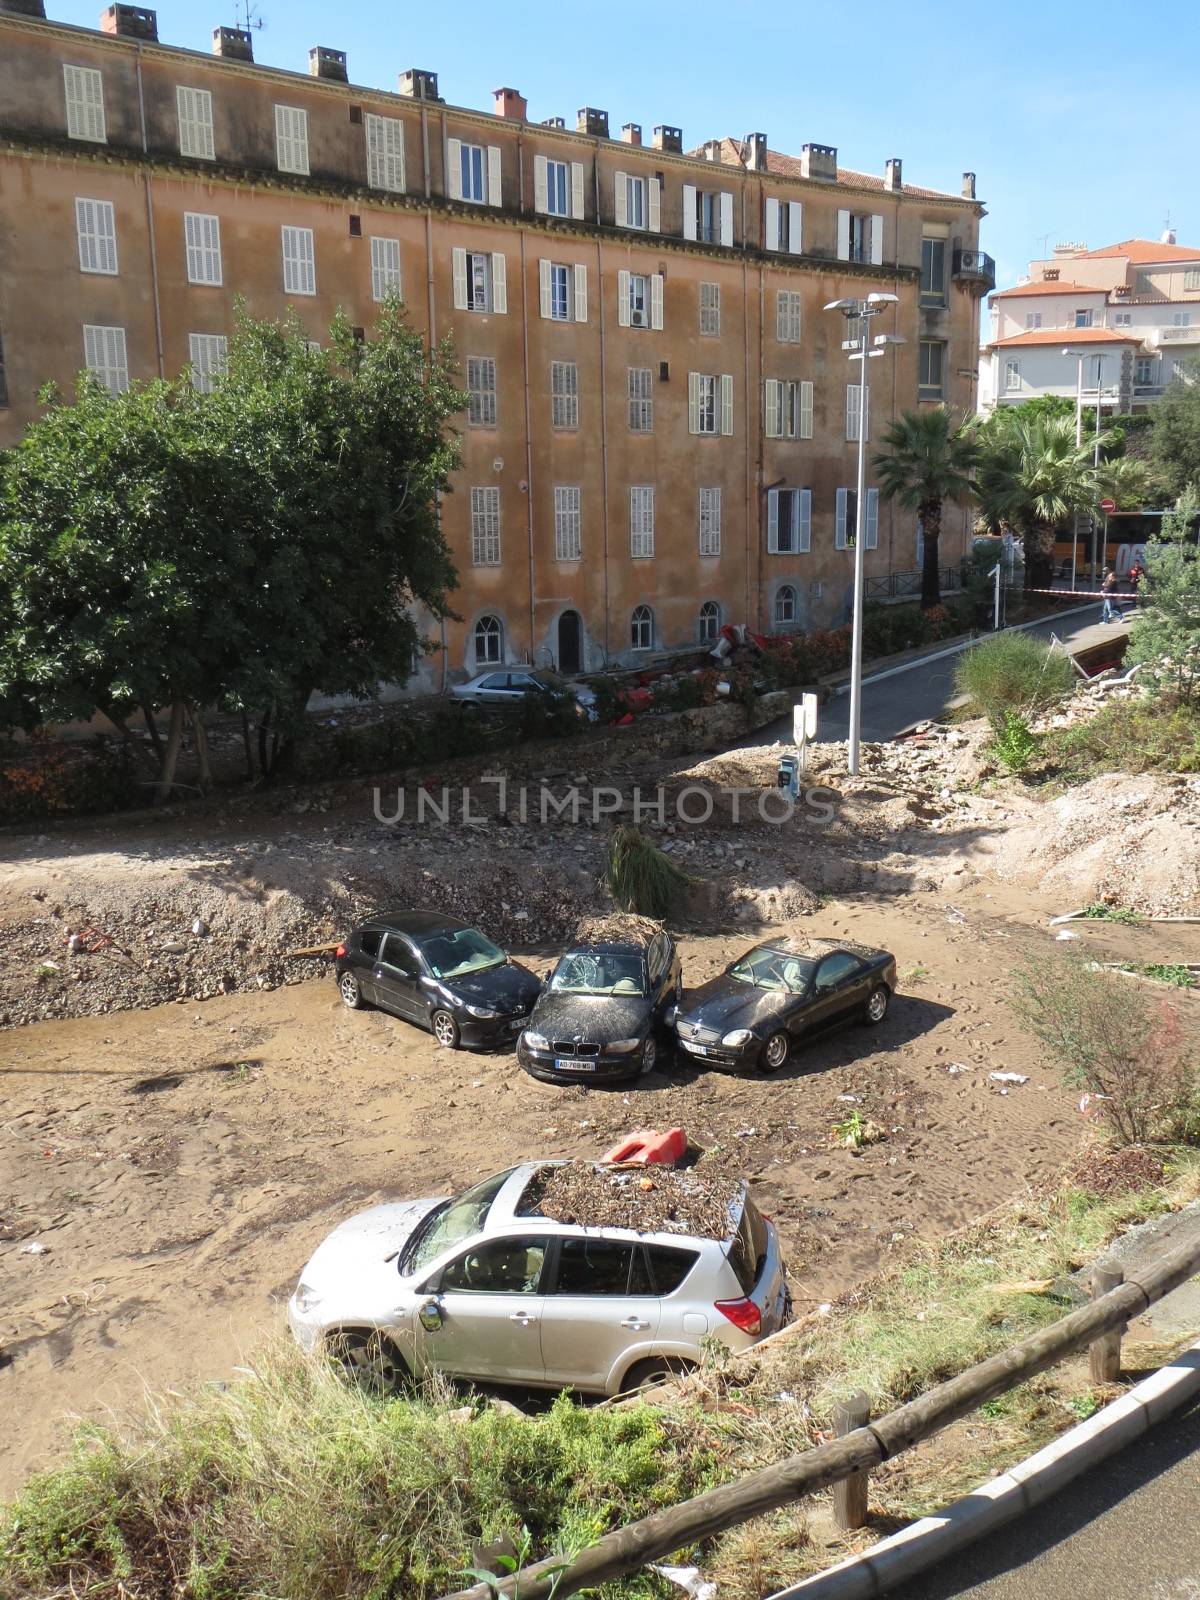 FRANCE, Cannes : Some cars piled up in a street in Cannes, southern France, on October 4th, 2015 after fatal flooding. Deluge due to violent storms in the region of Alpes-Maritimes happened in the night between October 3rd and 4th, 2015, and caused the death of at least 17 people. 